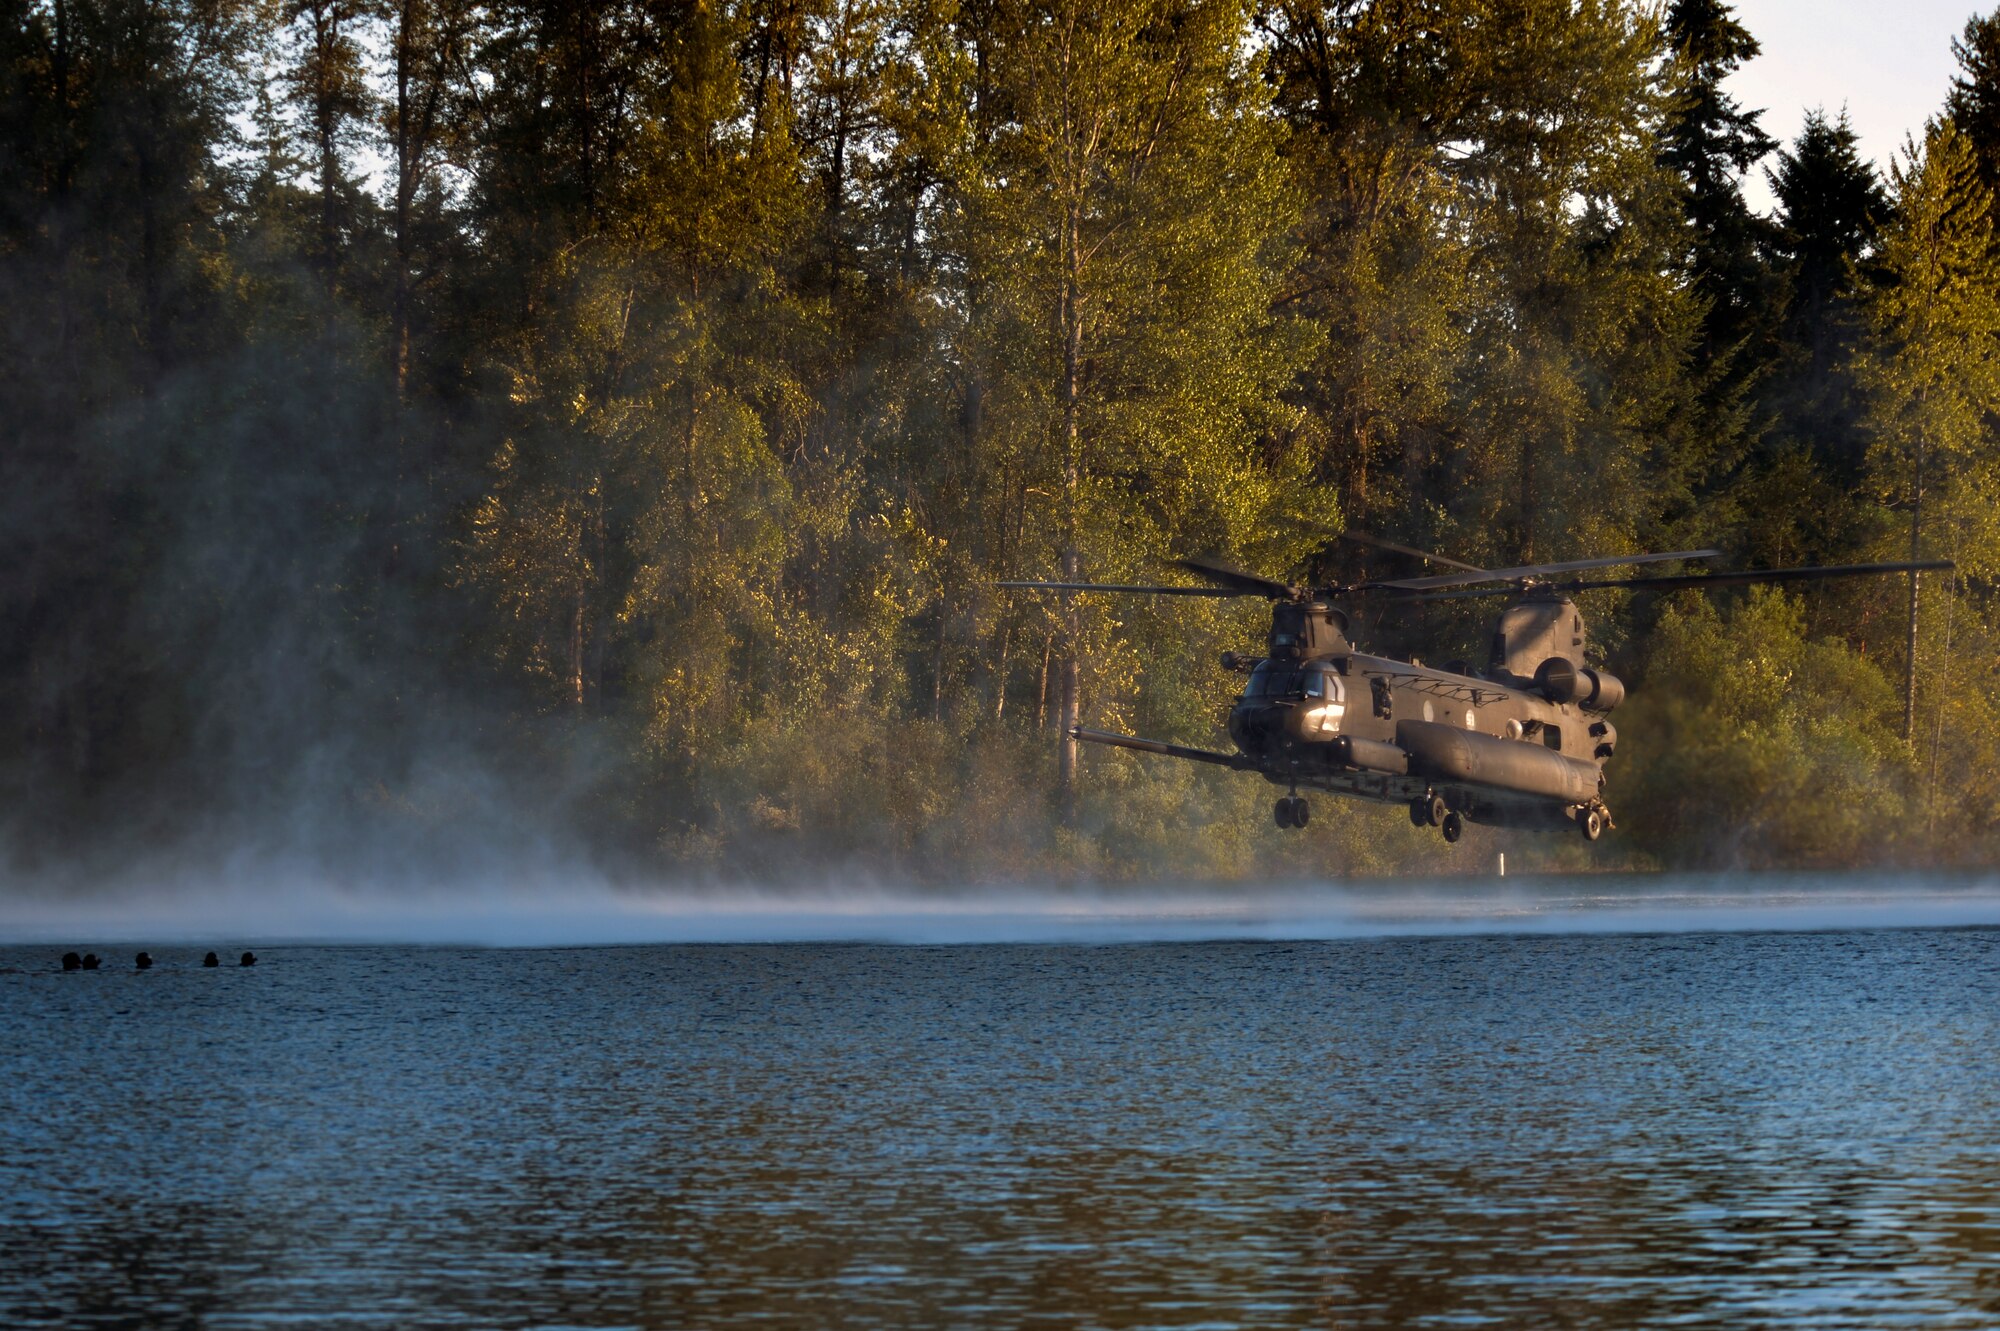 Airmen from the 22nd Special Tactics Squadron’s Red Team wait in American Lake, for an MH-47 Chinook helicopter to extract them during helocast alternate insertion and extraction training July 14, 2014, at Joint Base Lewis-McChord, Wash. The Soldiers, with the 160th Special Operations Aviation Regiment, needed the alternate insertion and extraction training and called upon members of the 22nd STS for assistance. (U.S. Air Force photo/Staff Sgt. Russ Jackson)